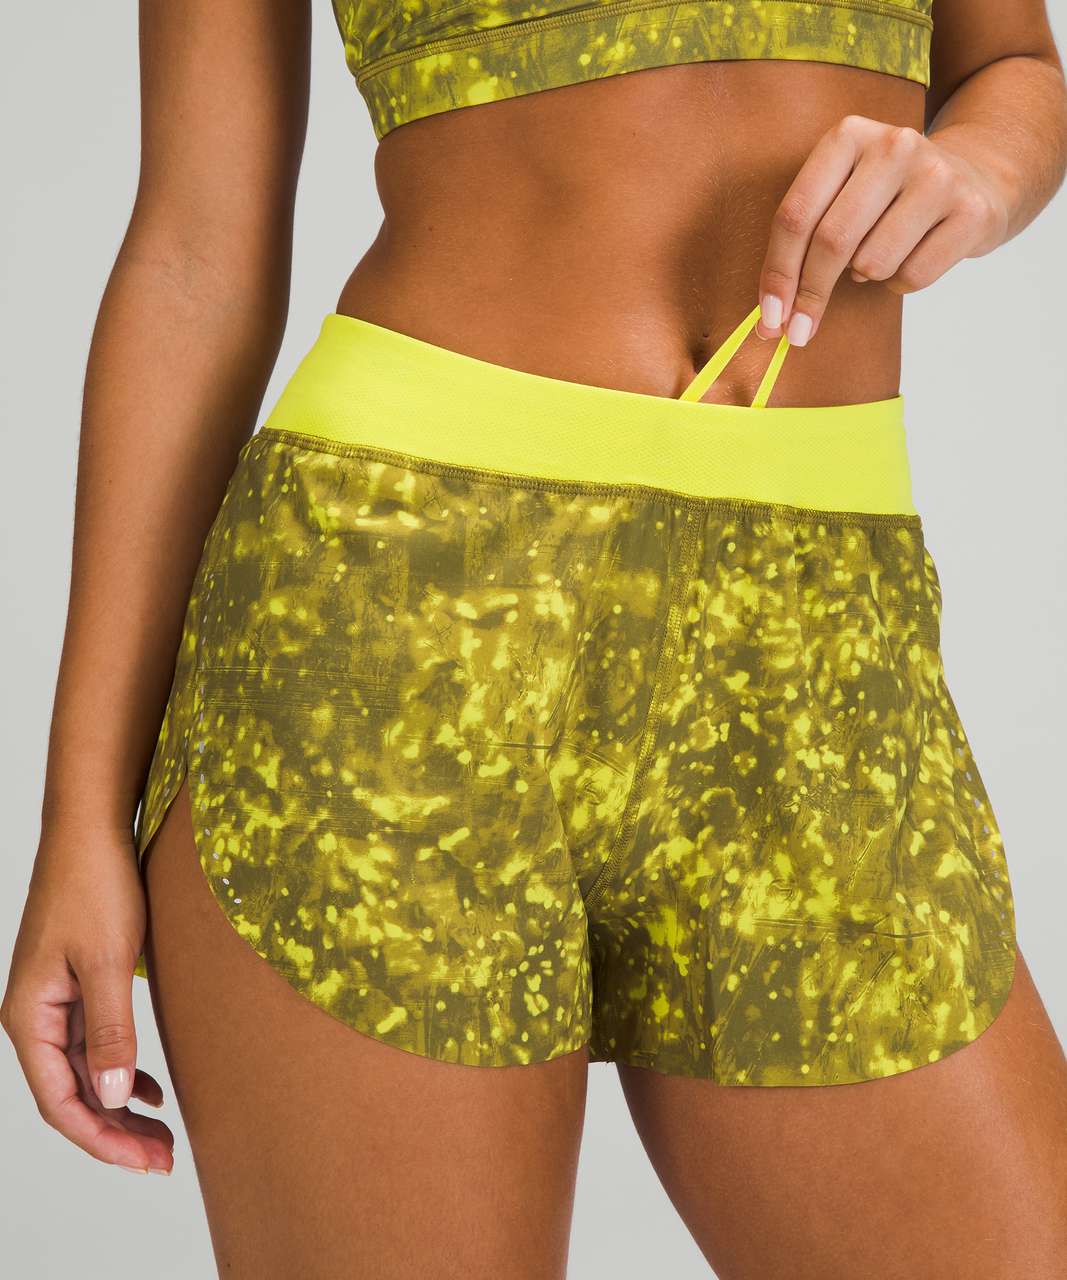 Lululemon SeaWheeze Find Your Pace Lined High-Rise Short 3" - Last Sparks Yellow Serpentine Multi / Yellow Serpentine